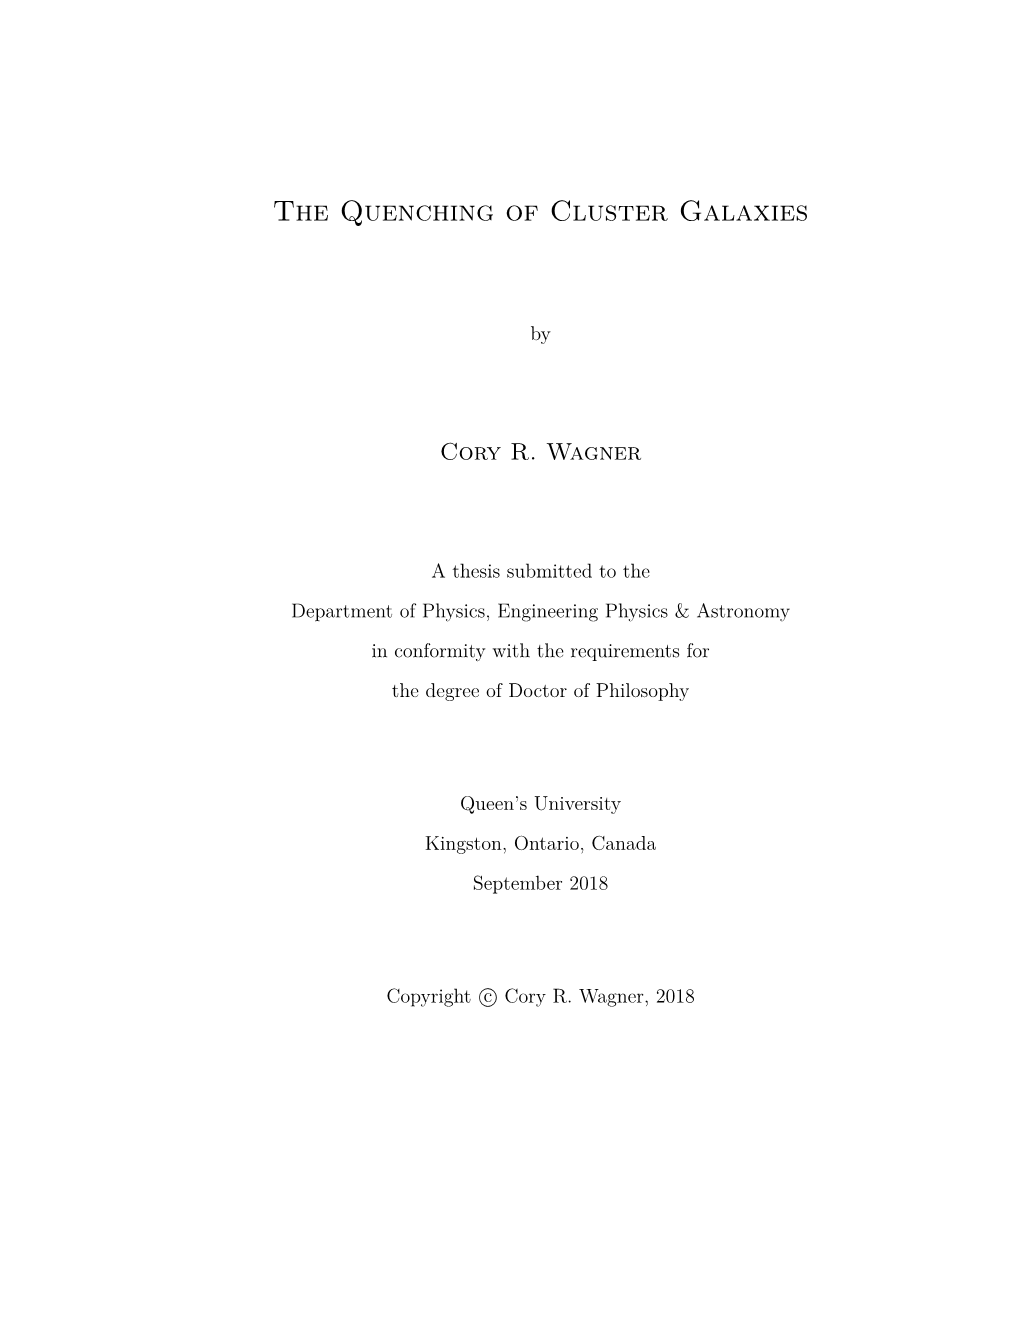 The Quenching of Cluster Galaxies